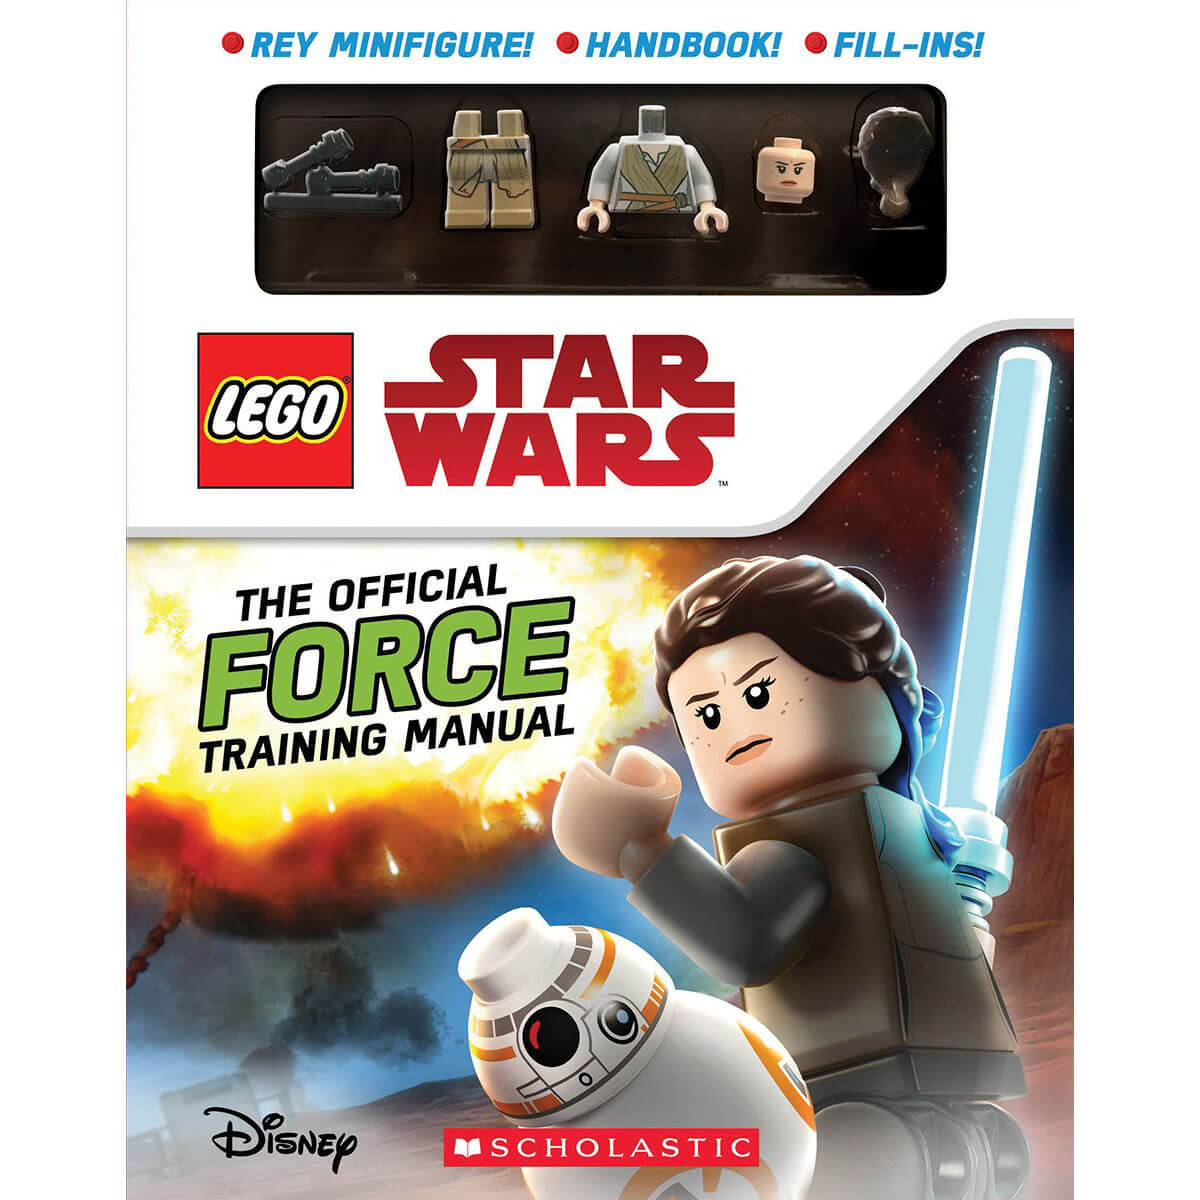 Official Force Training Manual (LEGO Star Wars)